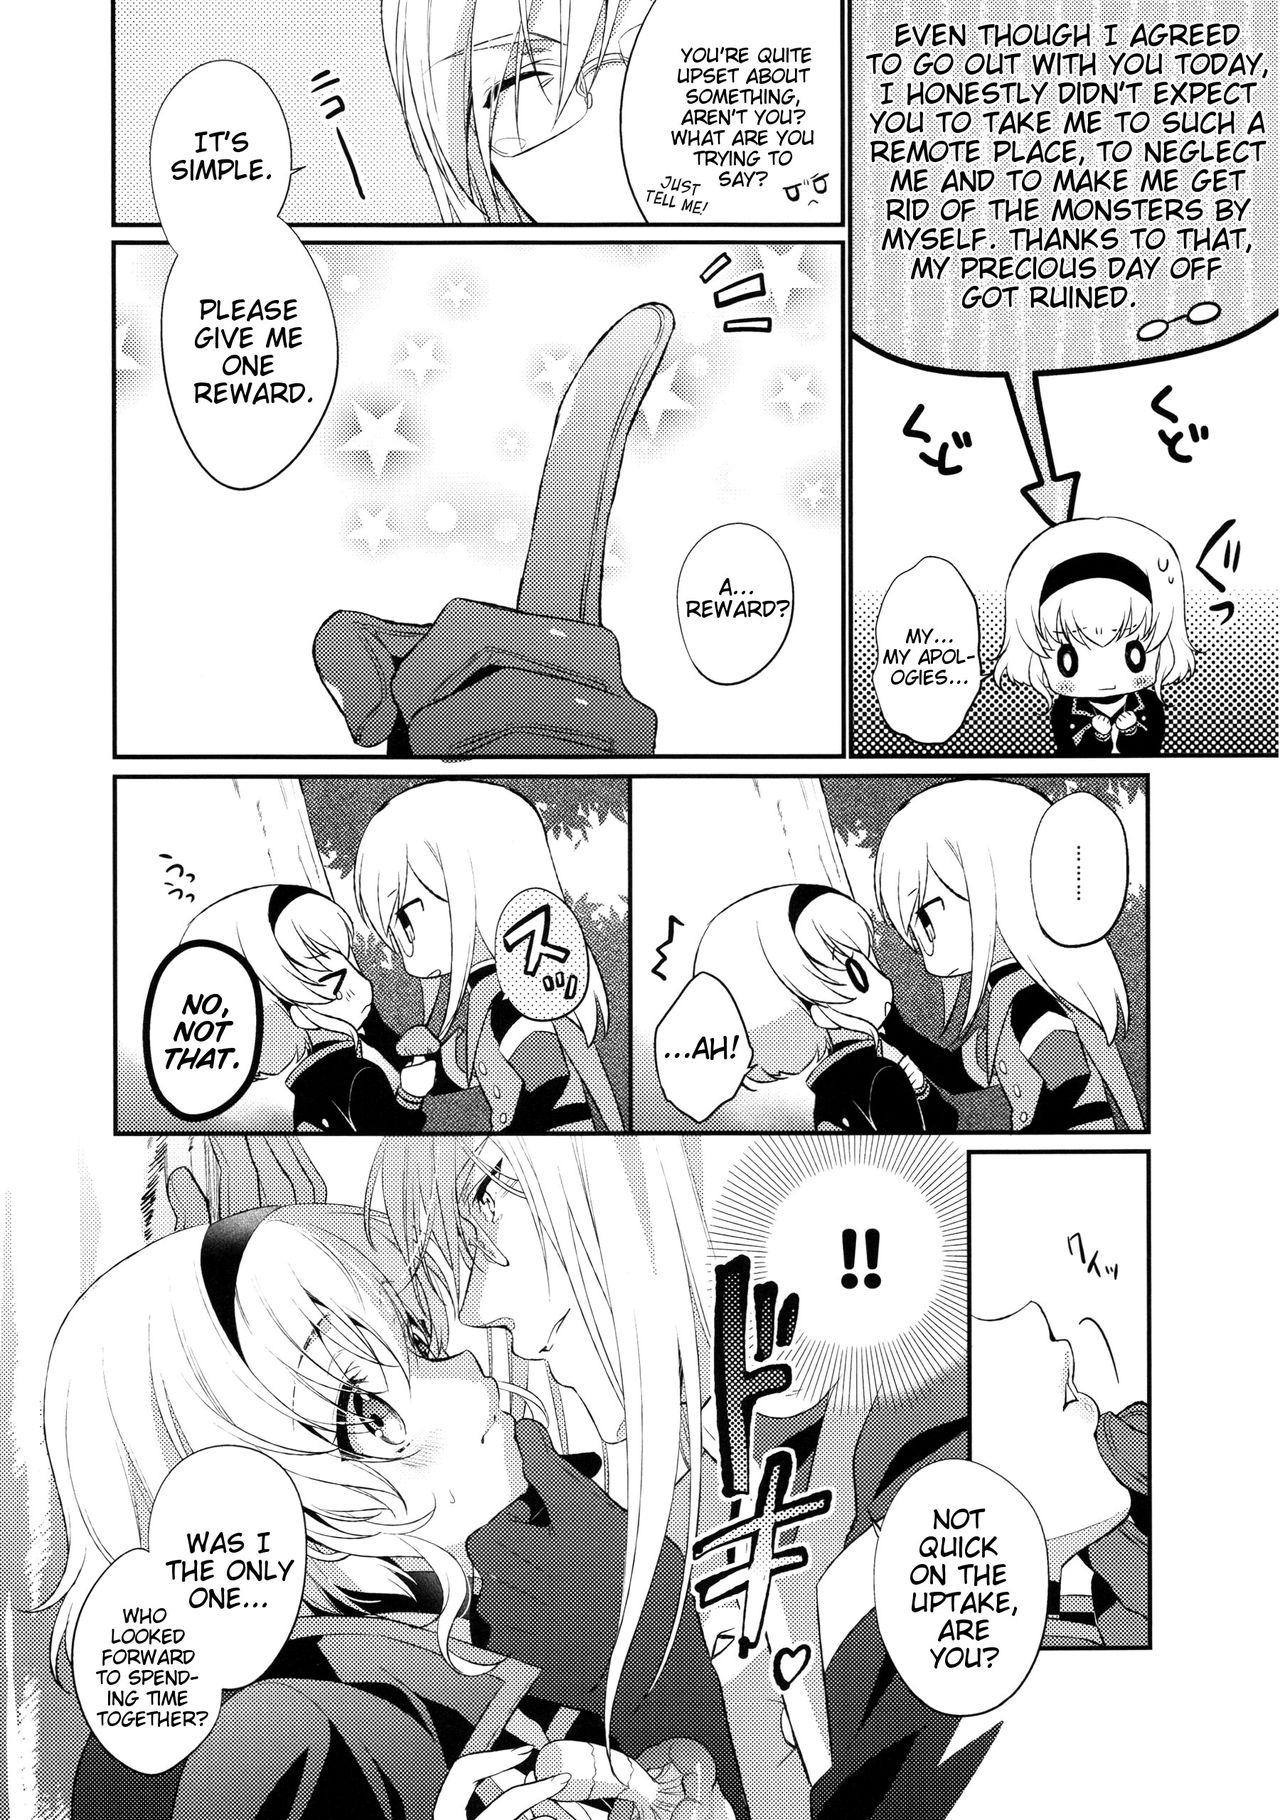 Hardcore Rough Sex Kirakira Girl - Tales of the abyss Straight Porn - Page 8